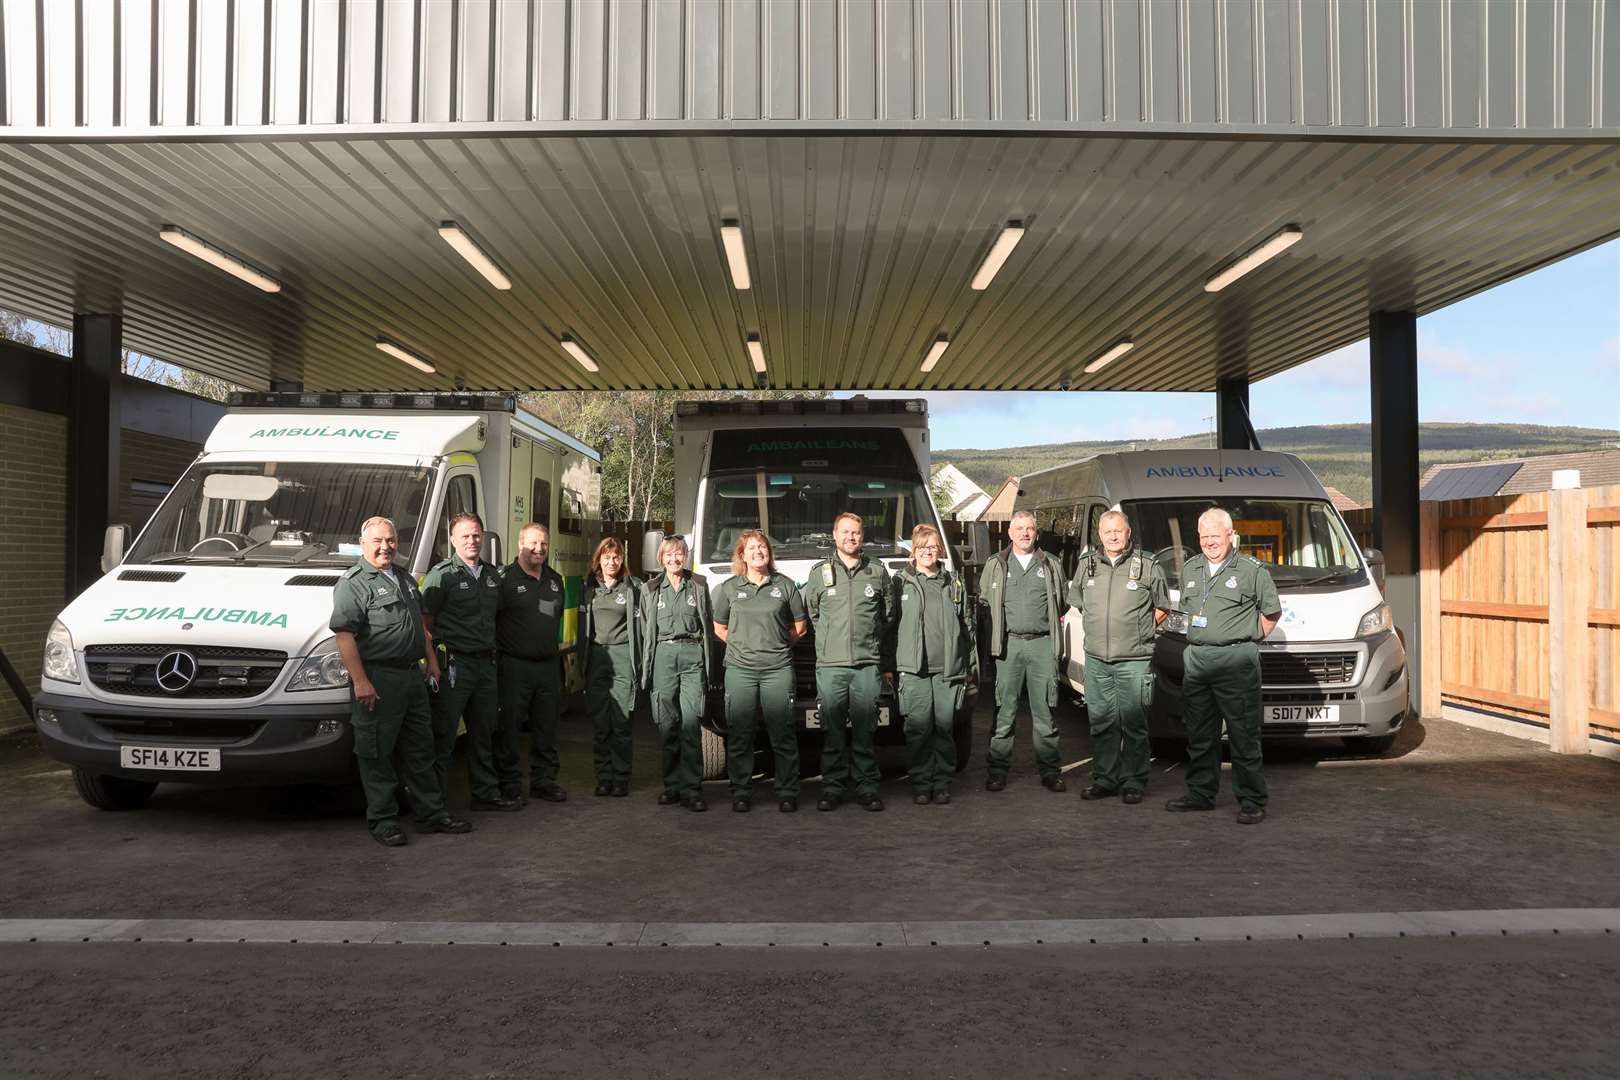 Ambulance crew members from across Badenoch and Strathspey at the new Scottish Ambulance Service base in Aviemore.